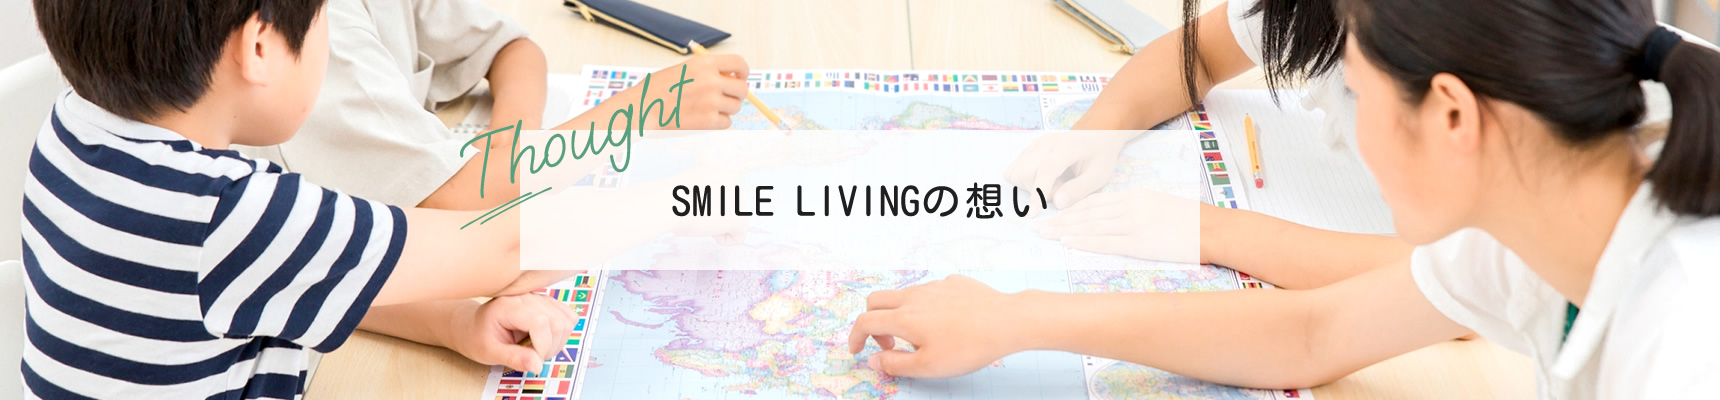 SMILELIVINGの想い